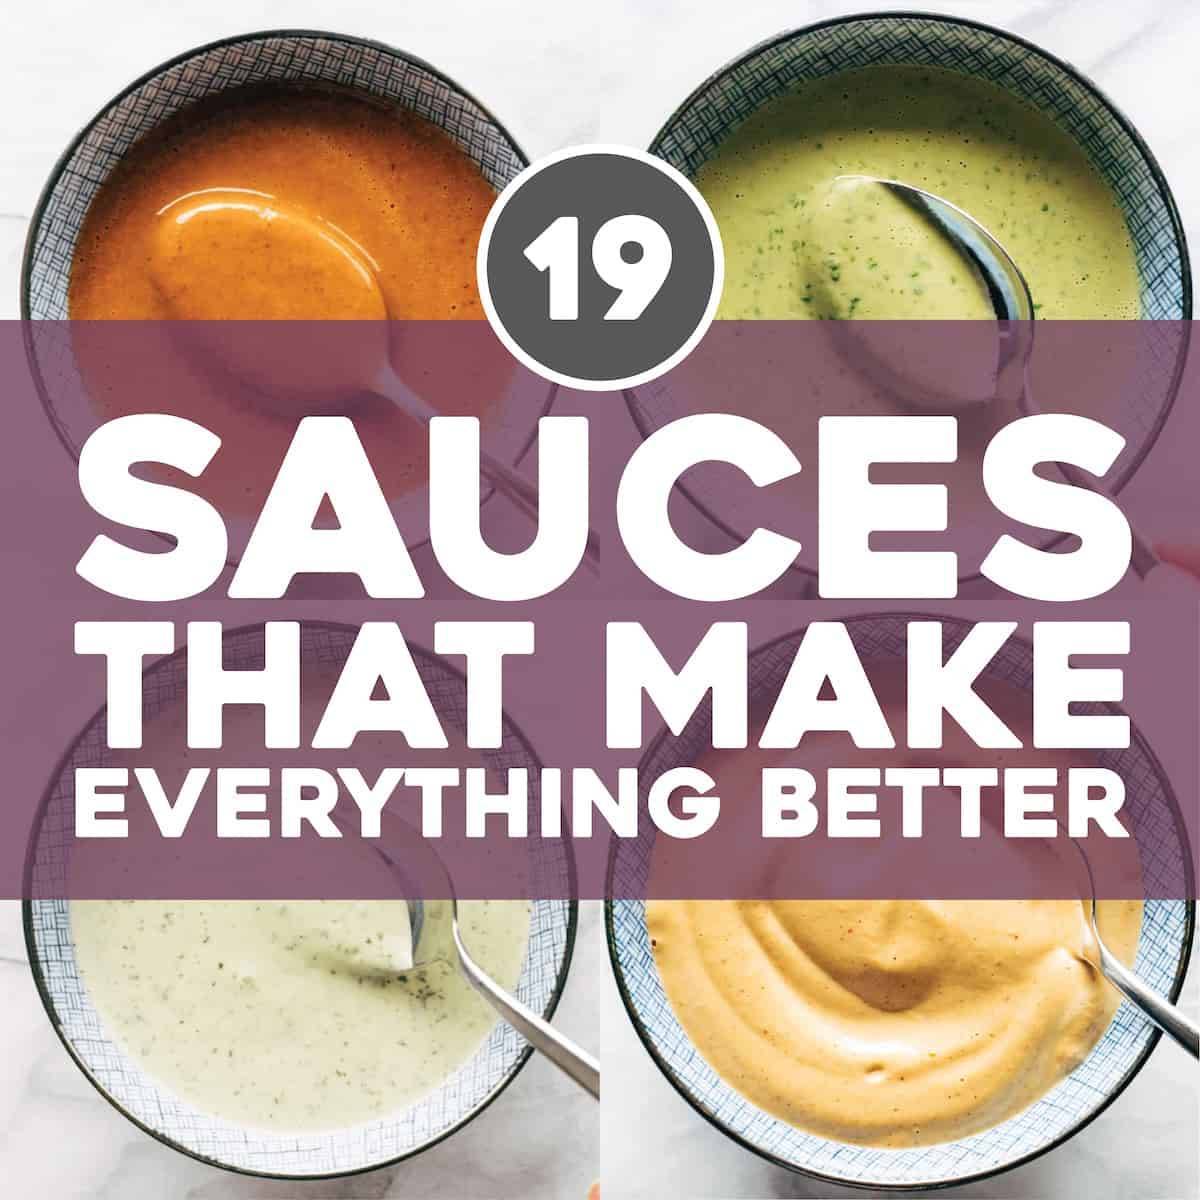 19 sauces that make everything better.